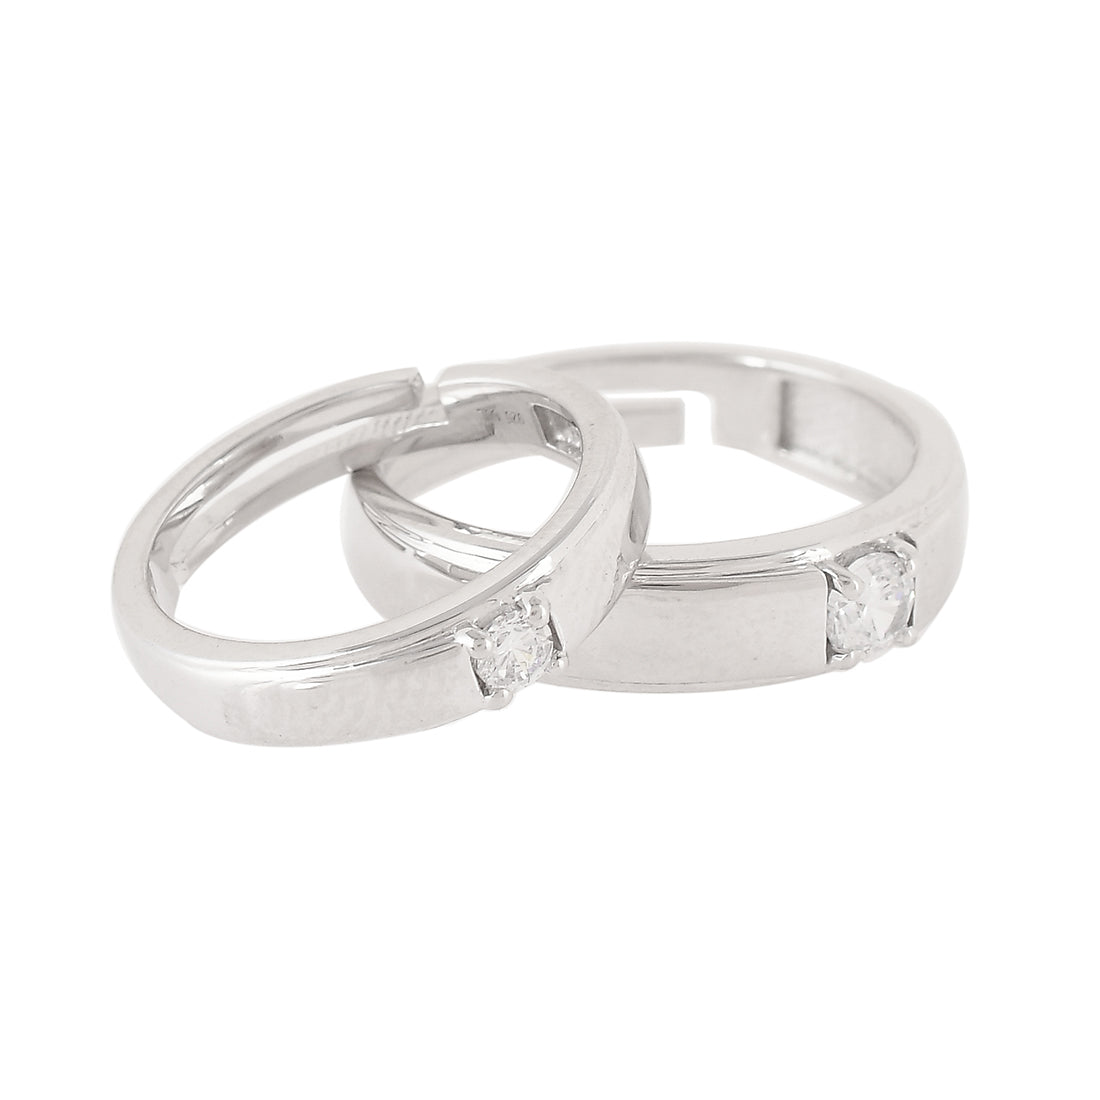 Women's Sterling Silver Cz Couple Band Rings - Voylla